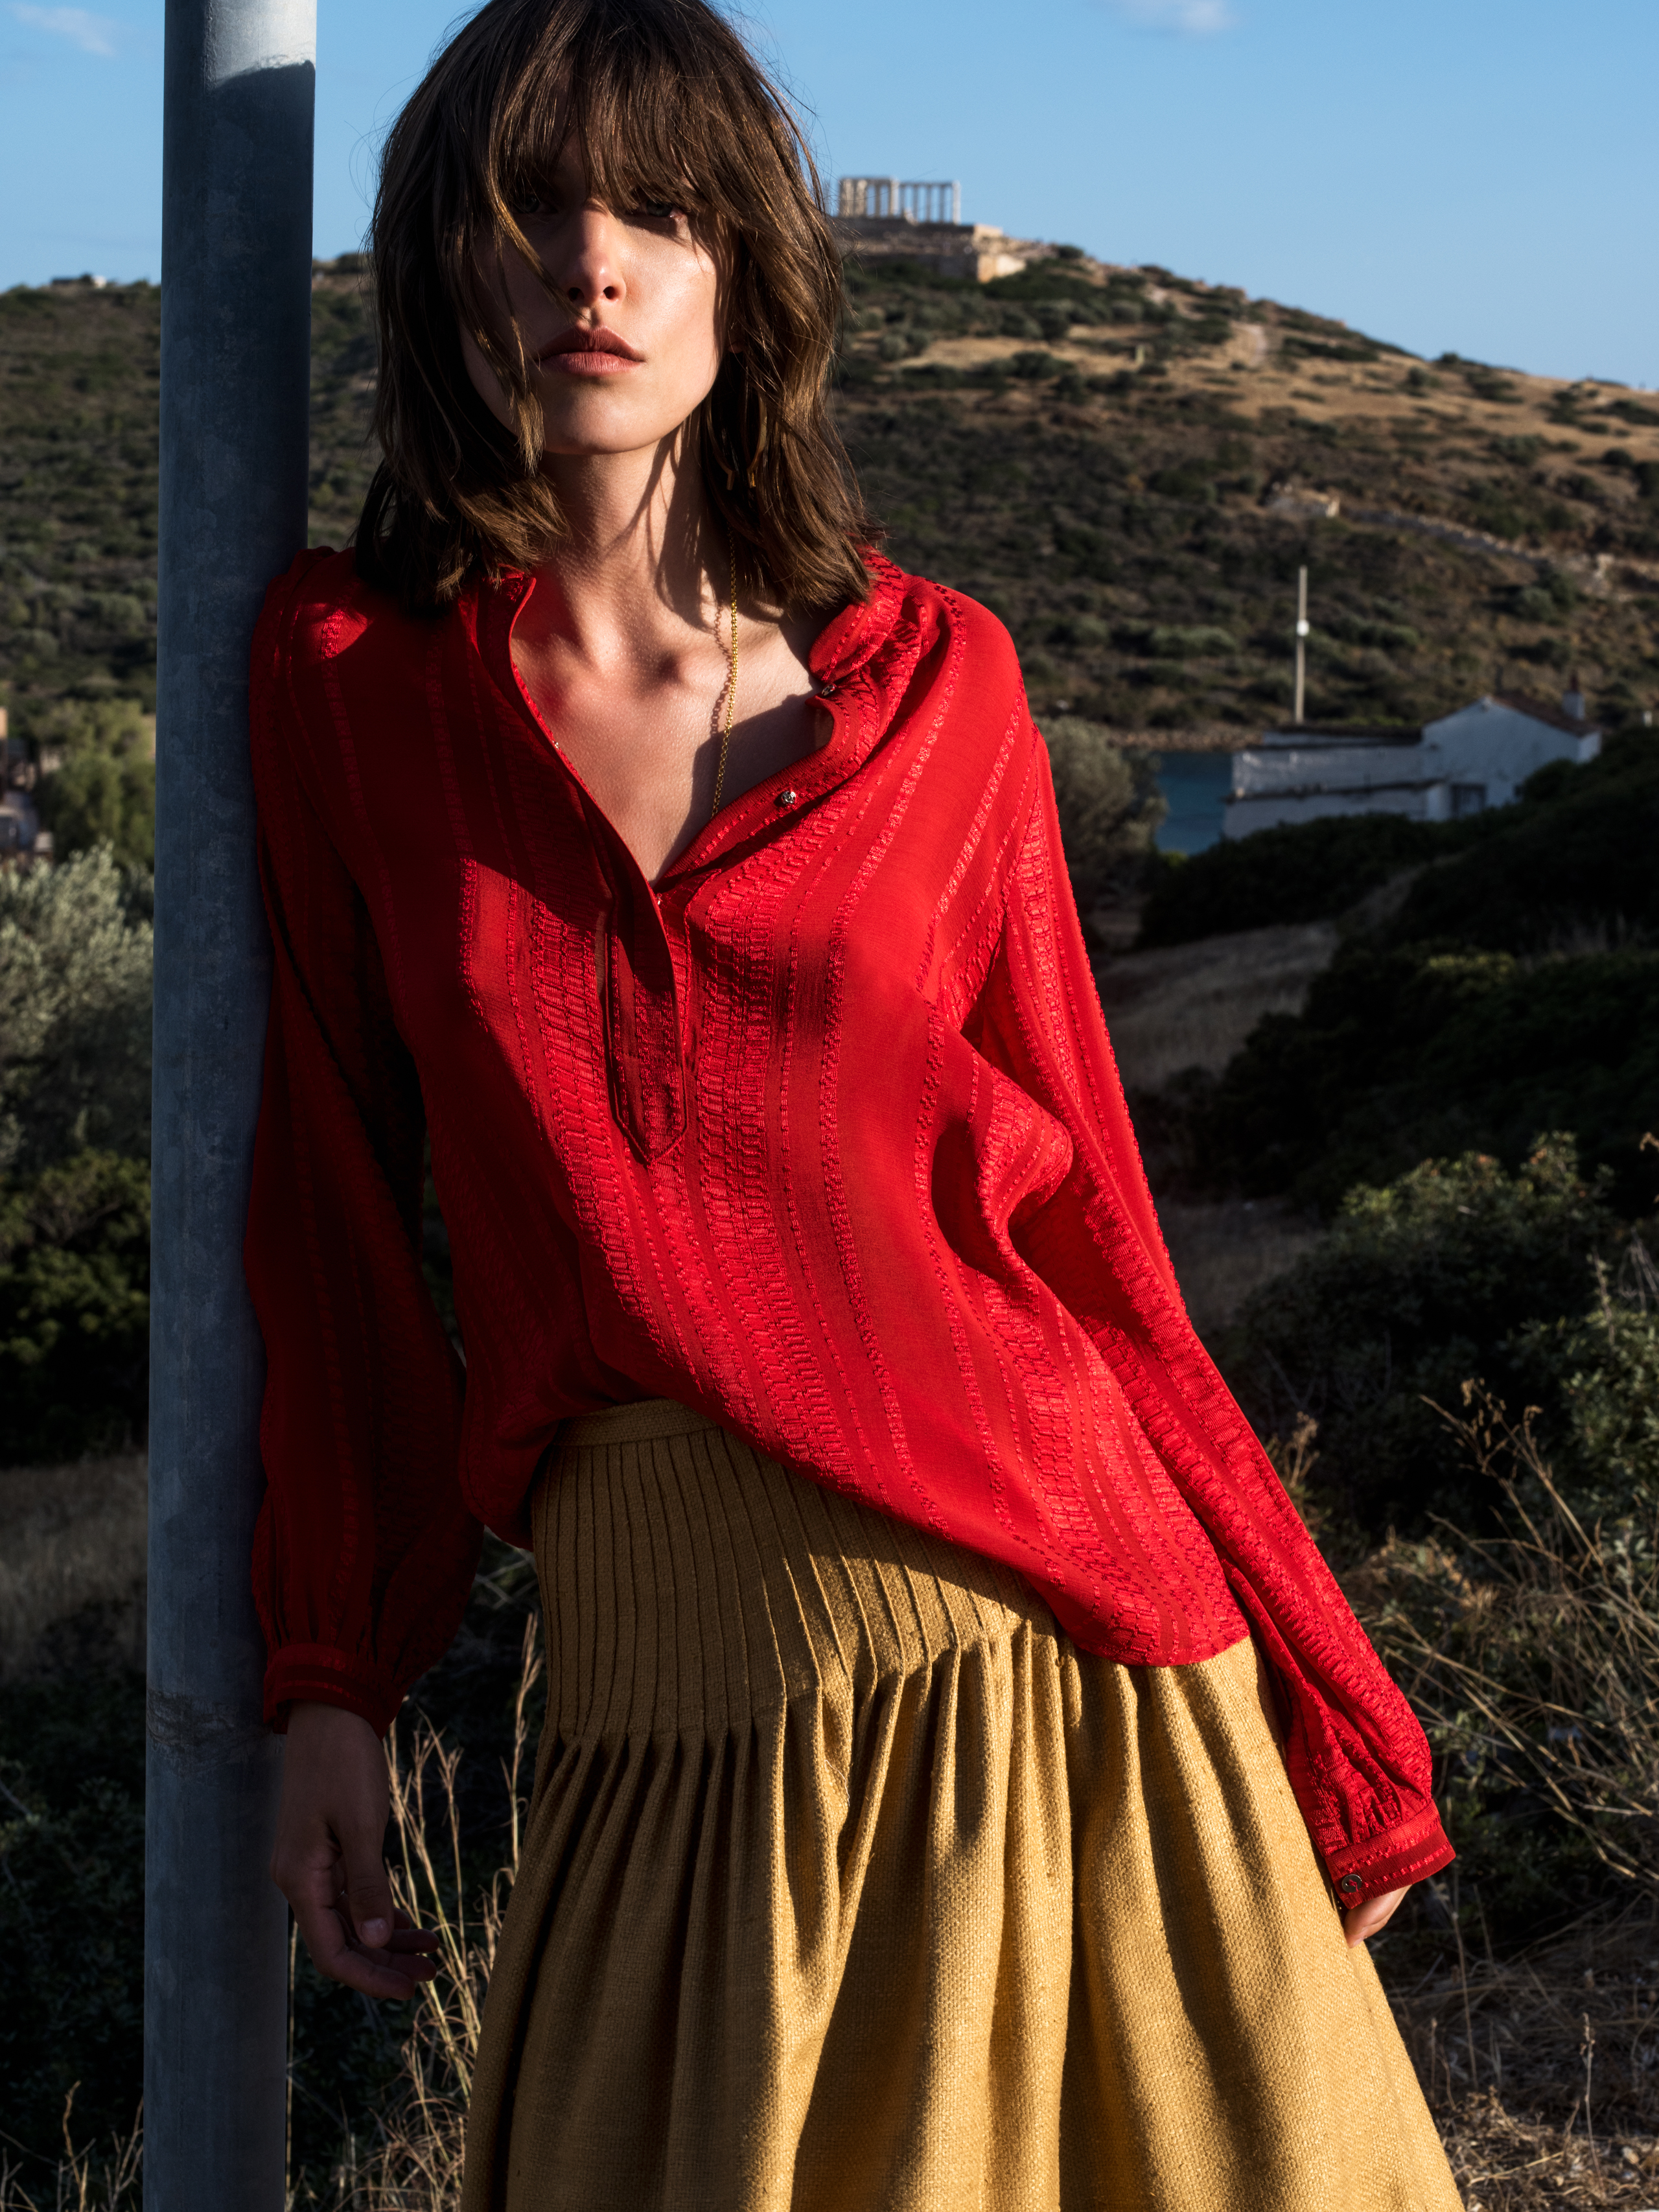 Hera blouse in red, Resort '19 campaign - Photo by Yiorgos Kaplanidis